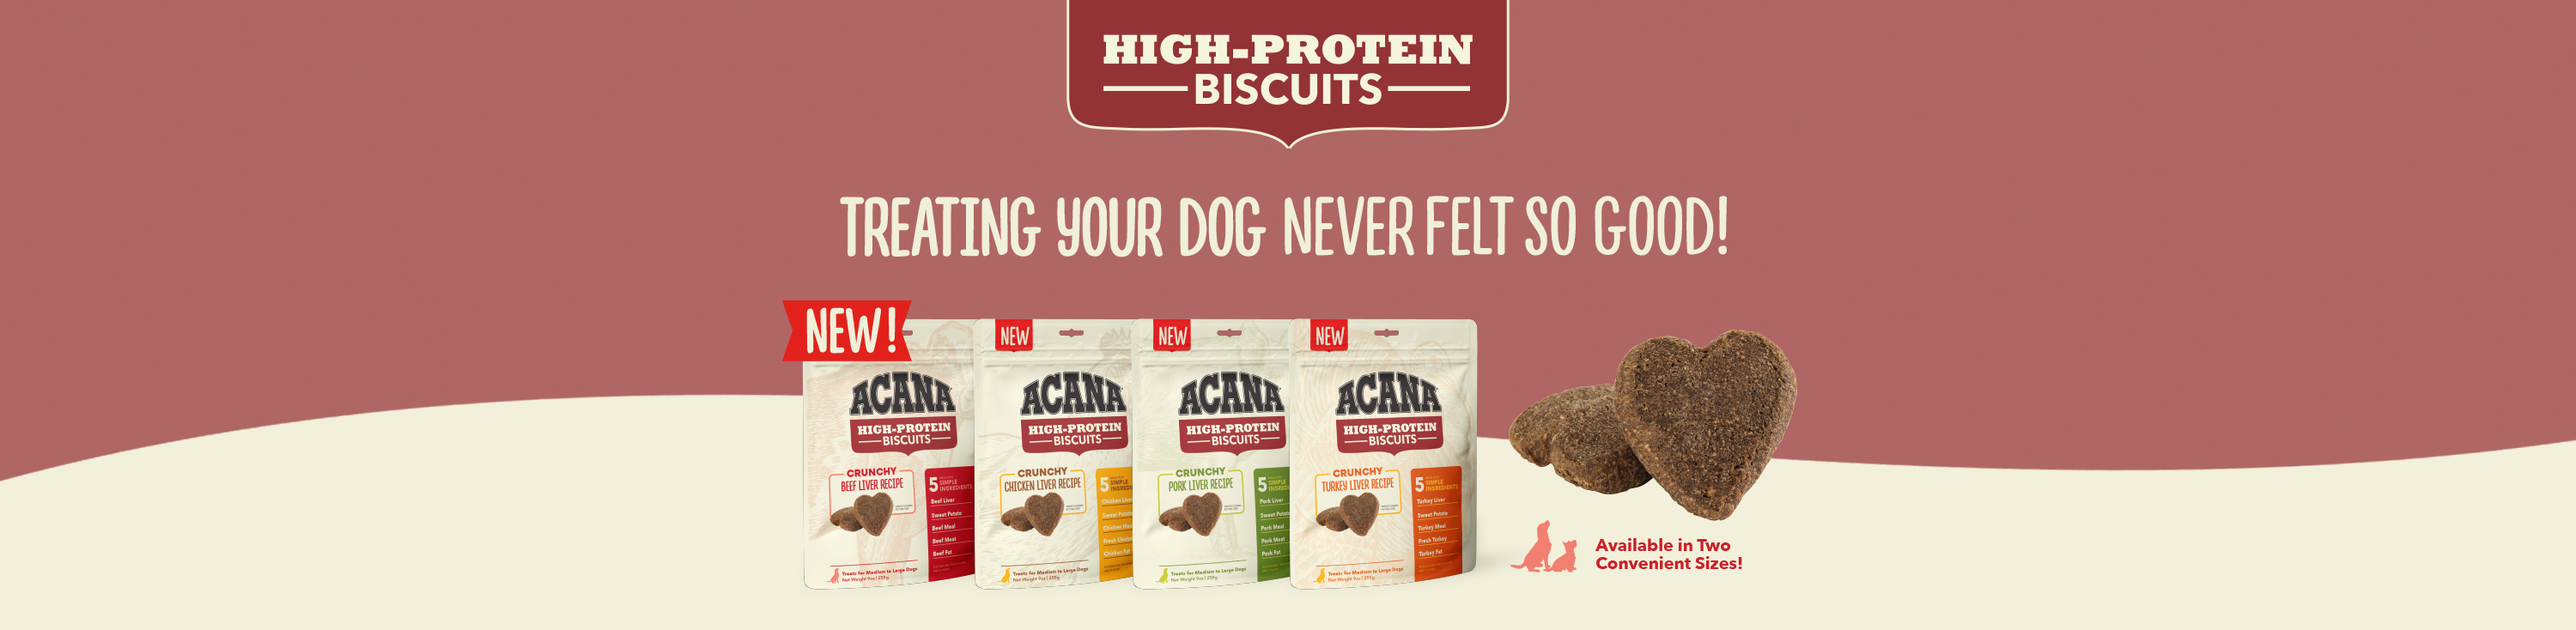 High protein biscuits